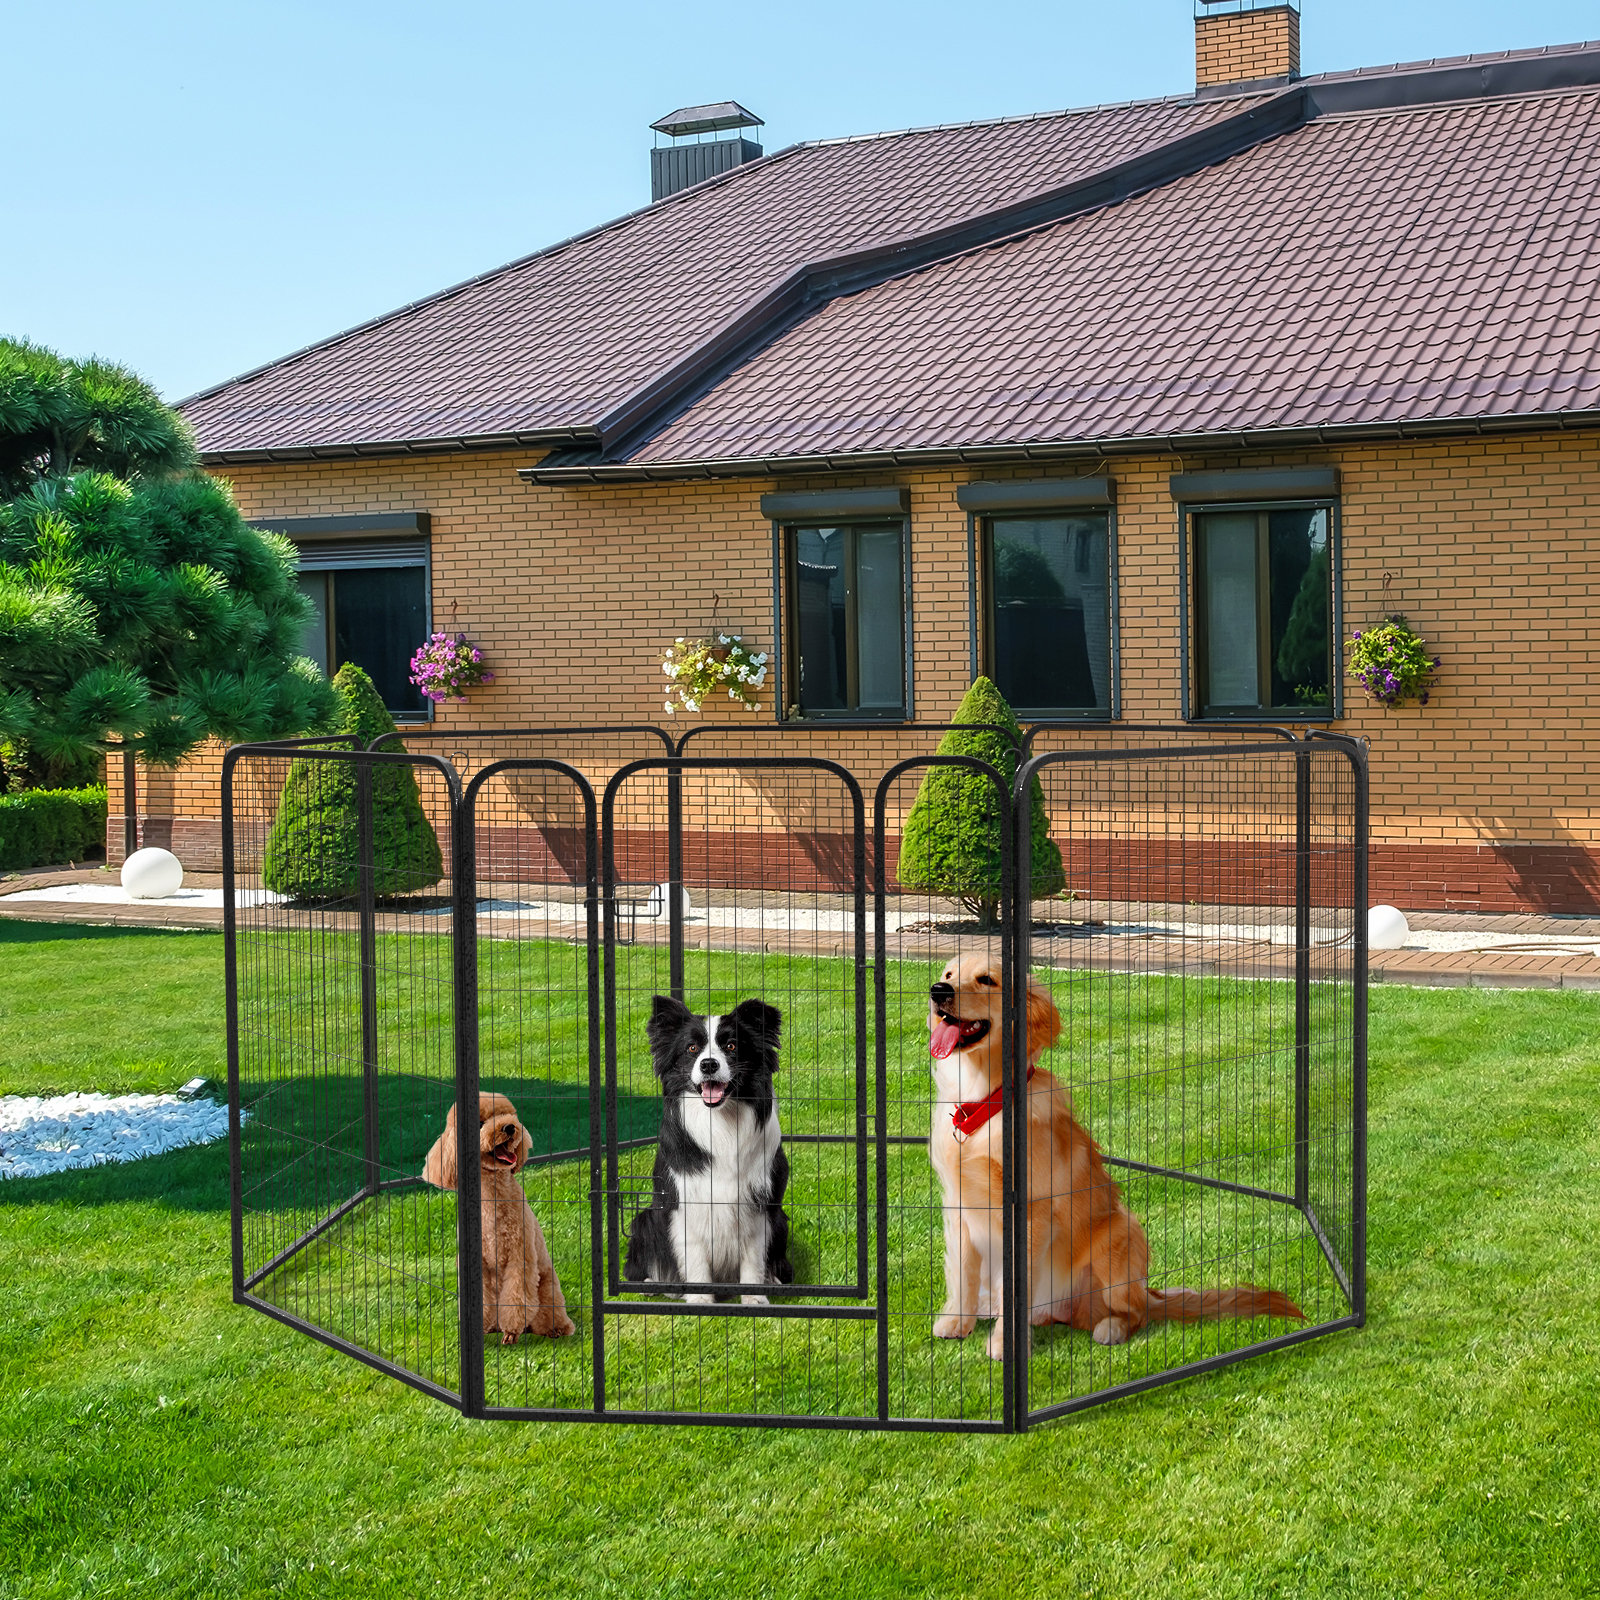 PawGiant Dog Fence Playpen 24”/32”/40” Indoor Outdoor for  Small/Medium/Large Dogs, Metal Pet Puppy Cat Exercise Fencing Gate Crate  Cage Outside RV